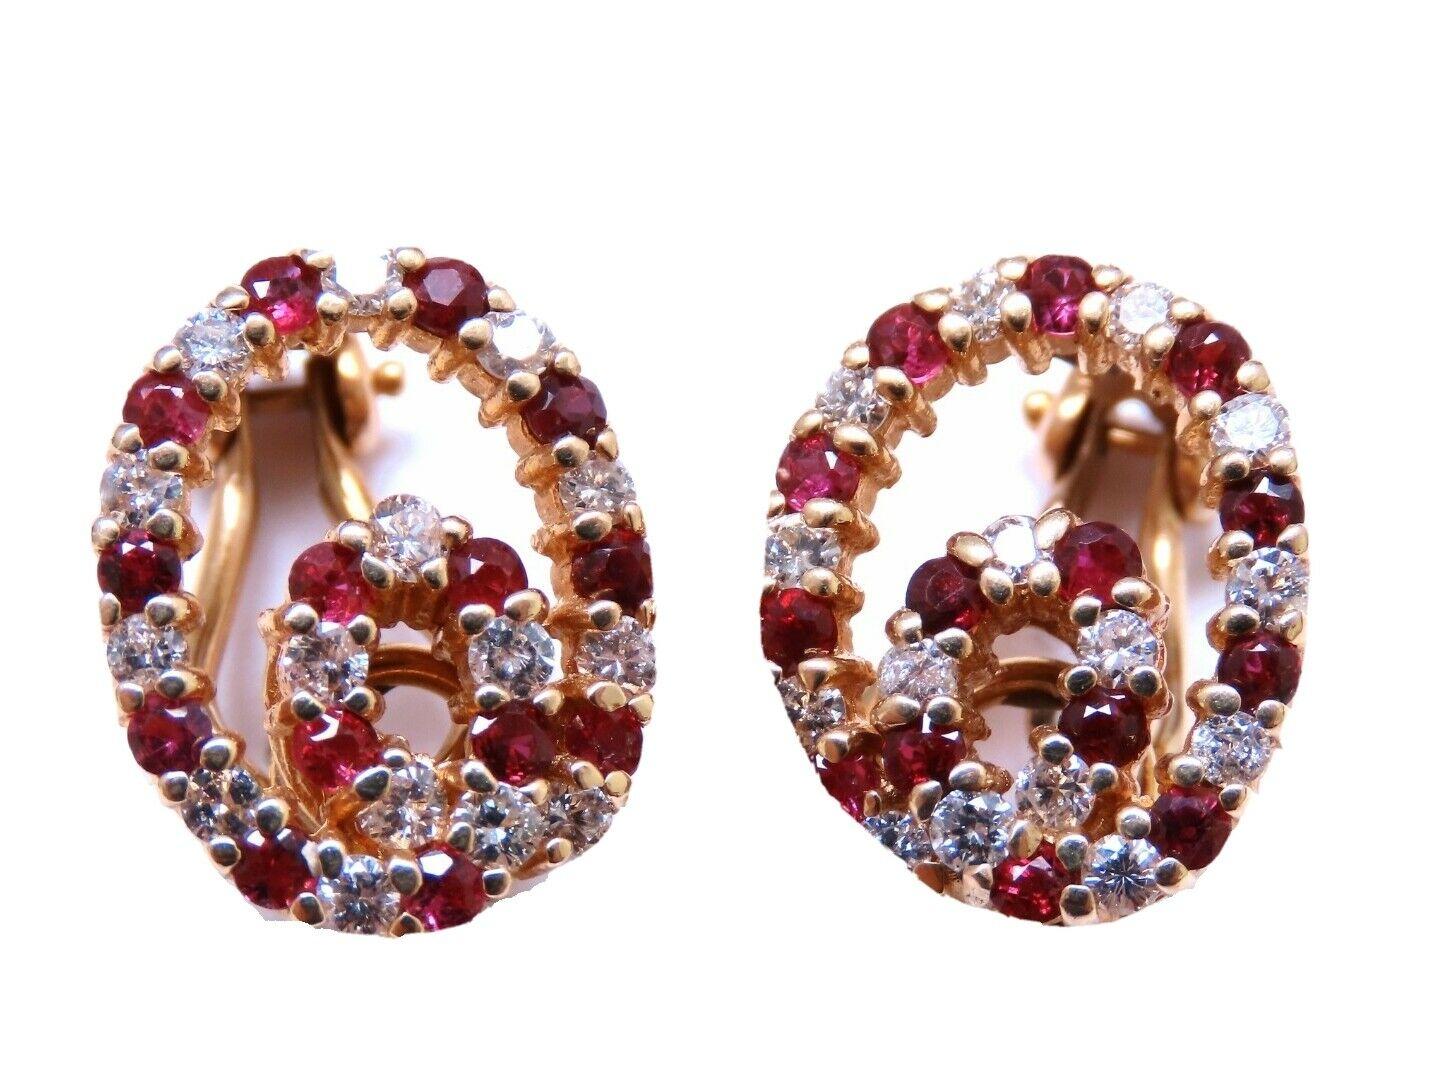 Ruby swirl endless clip earrings.

.65ct natural  rubies, full brilliant cut clean clarity and transparent

.50ct. natural round diamonds h color vs2 clarity.

14 karat white gold 8g

Earrings measure 16 x 13mm